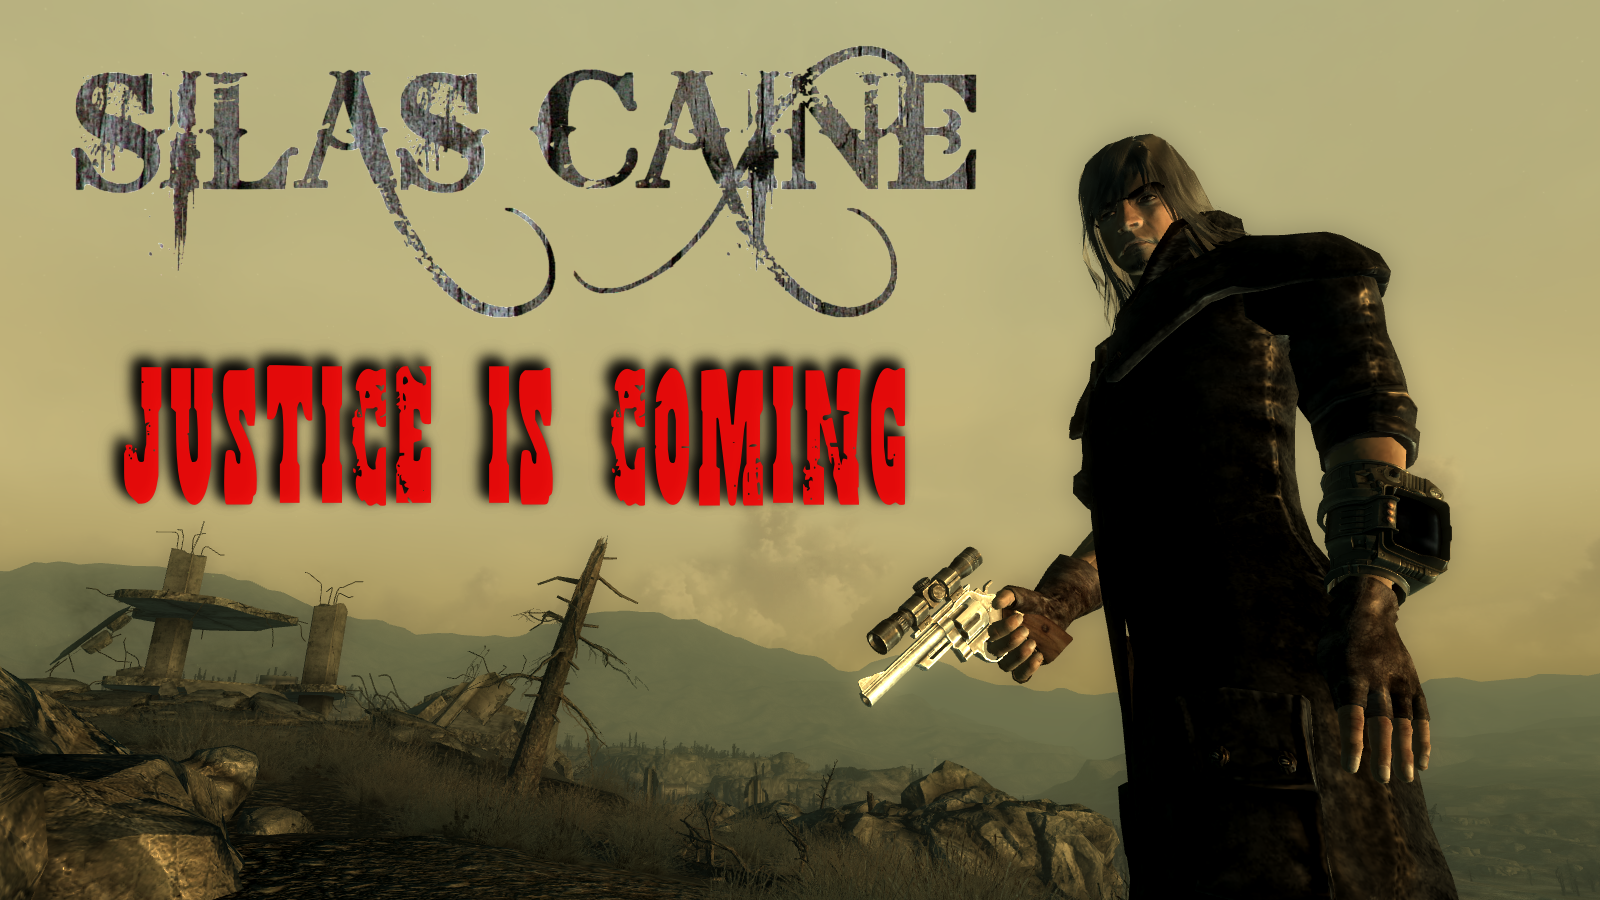 More information about "Silas Caine- Justice is Coming"